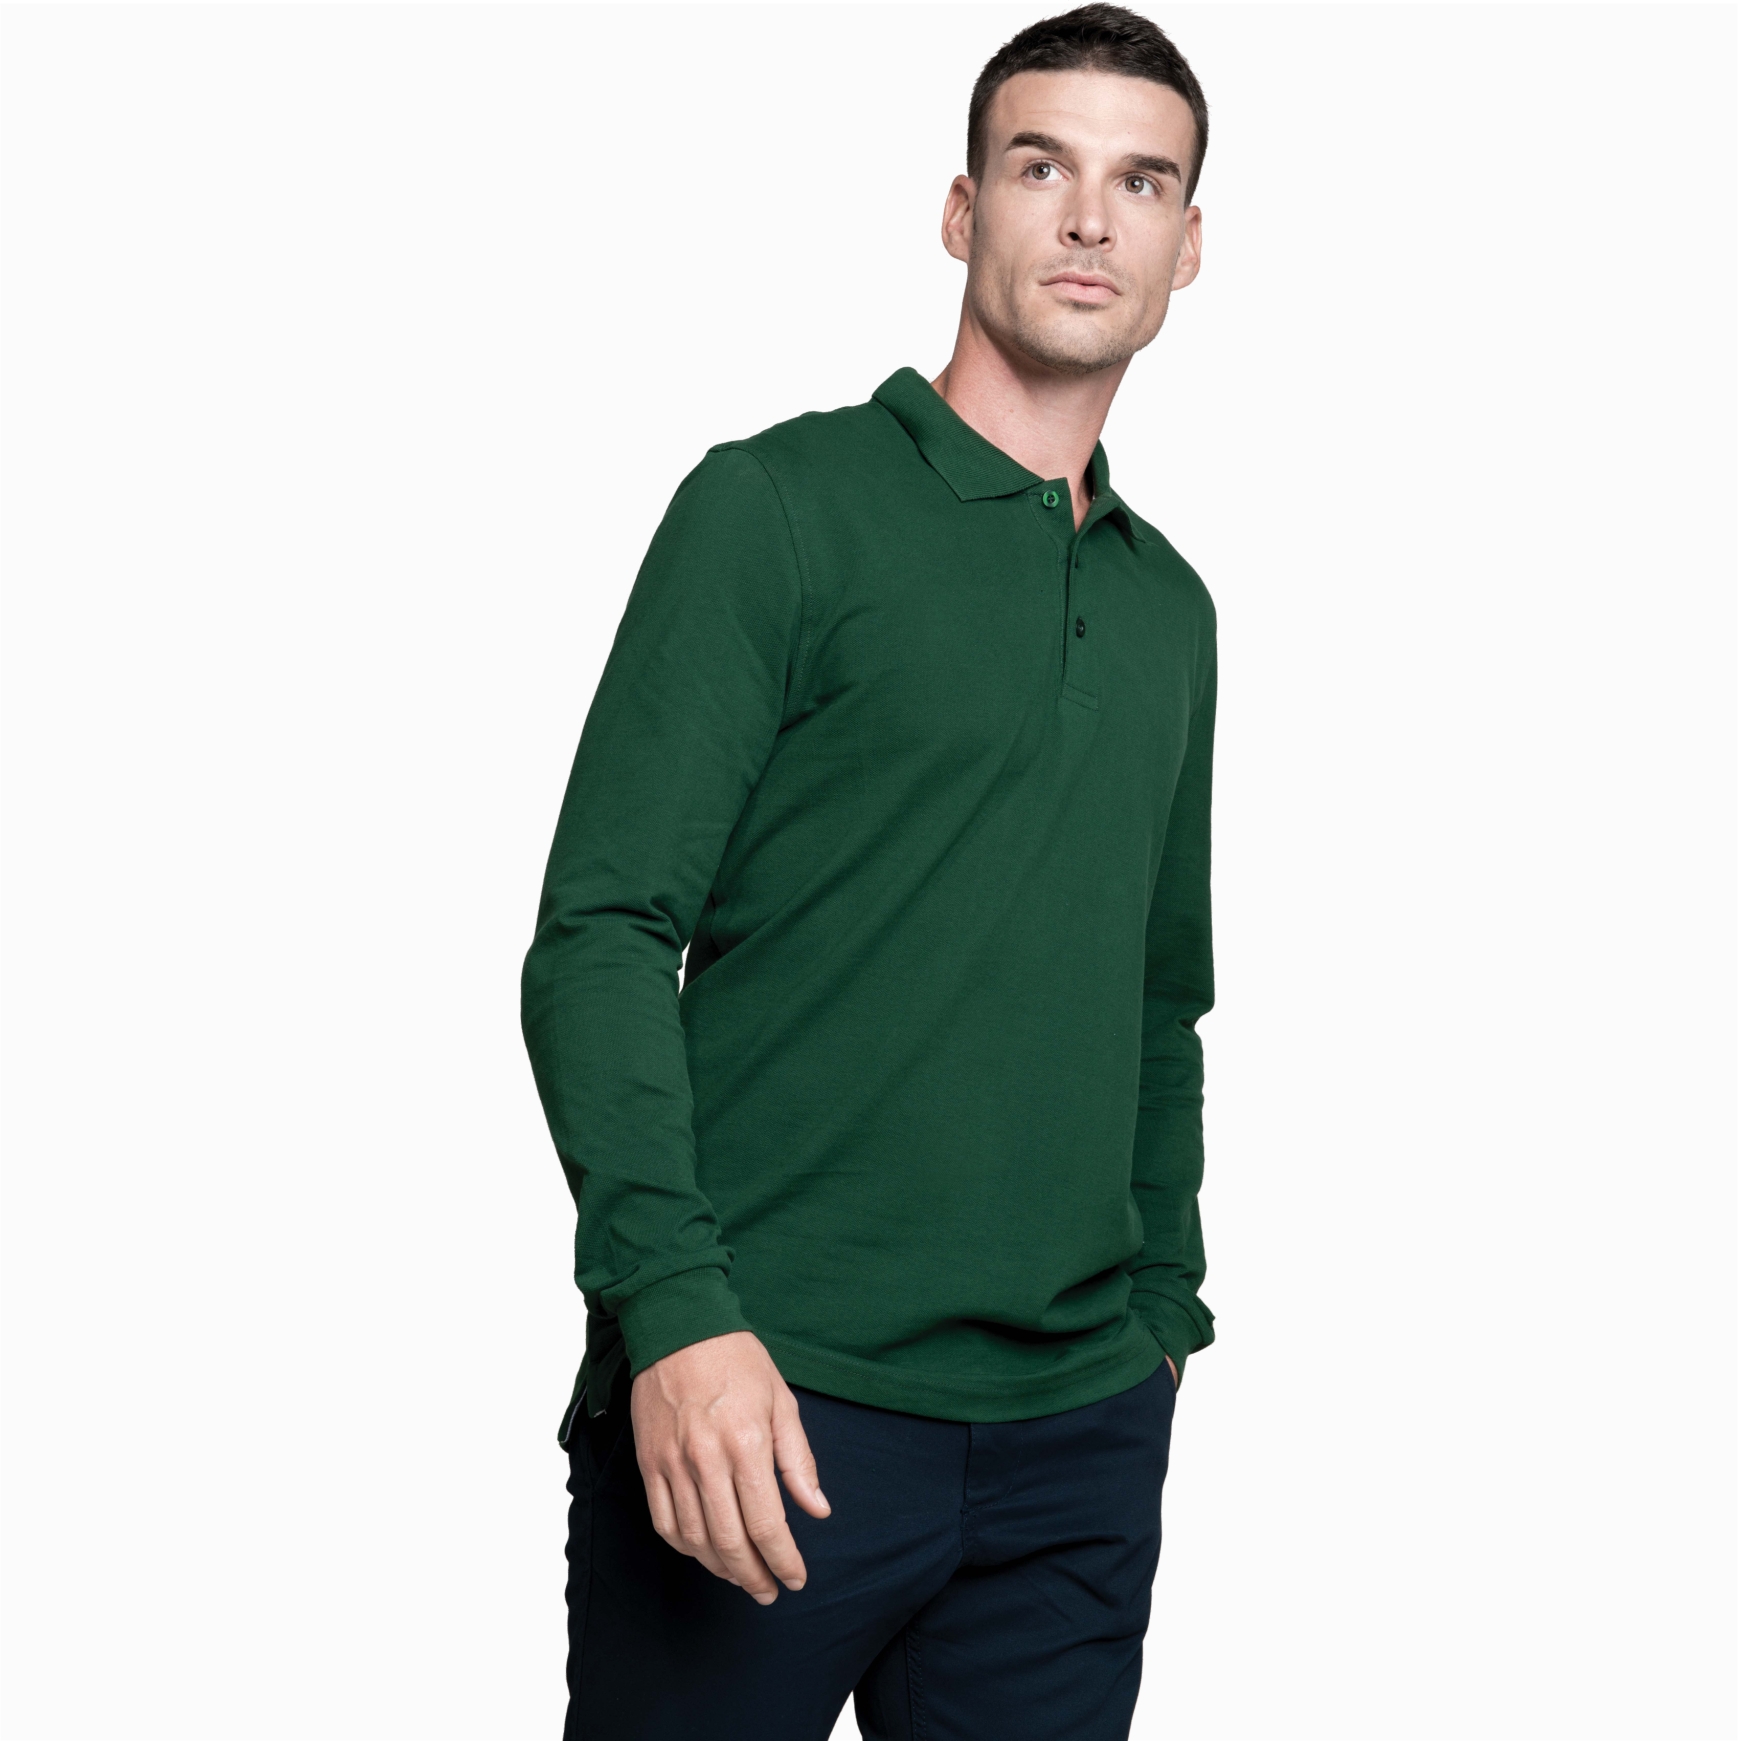 K243 - Polo manches longues homme